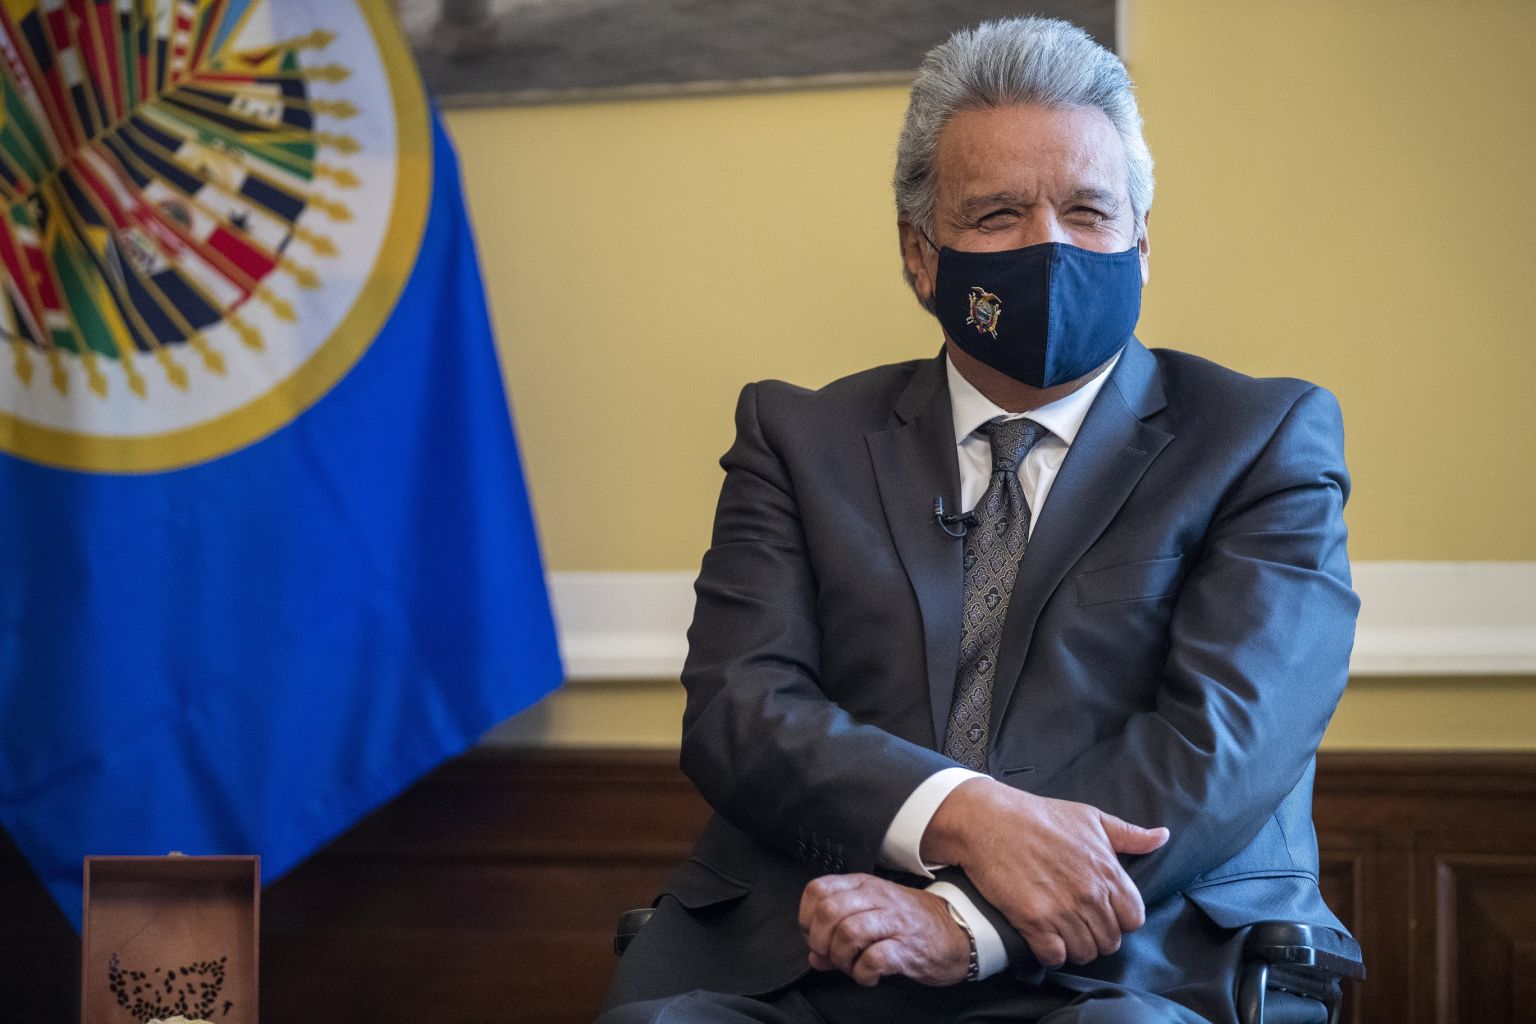 The aircraft carrying Ecuadoran President Lenin Moreno, the First Lady, and a delegation of top officials was forced to make an emergency landing